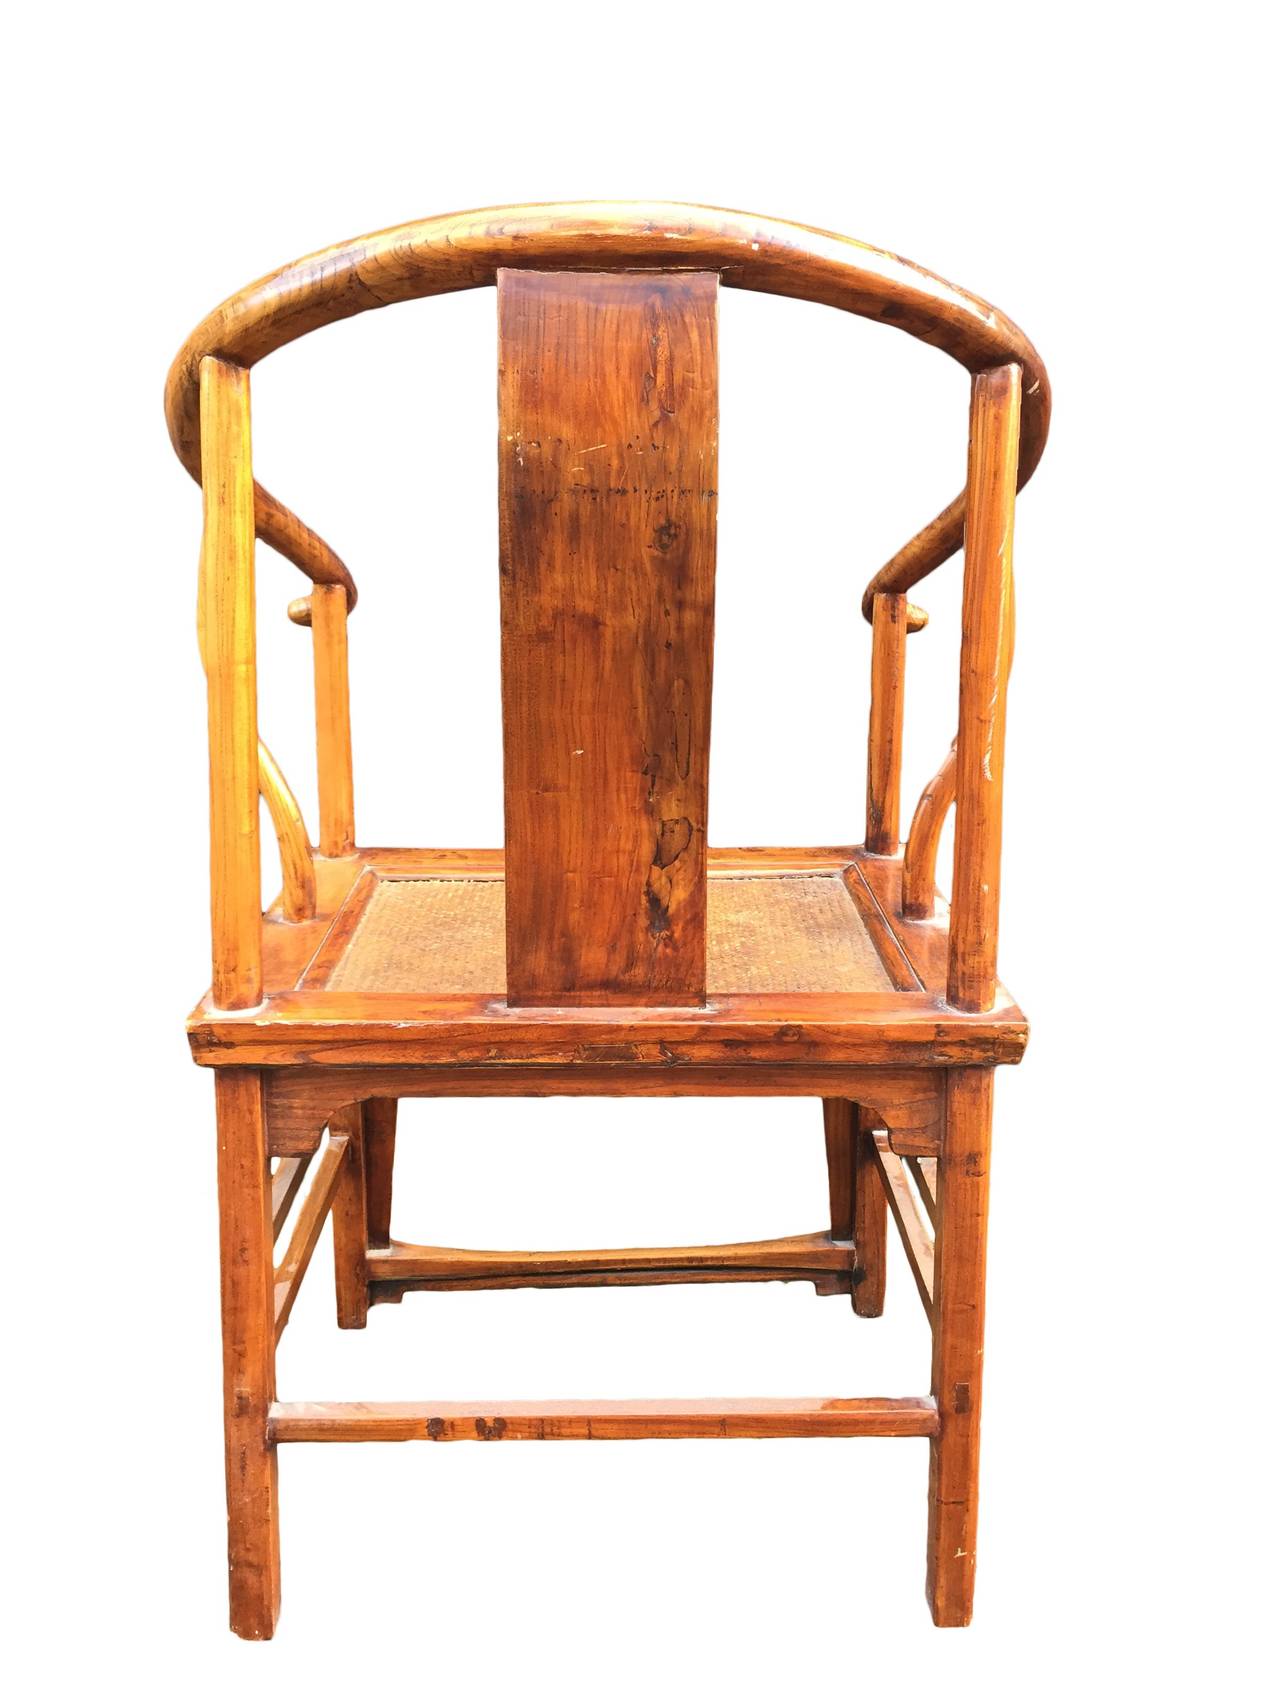 Chinese Antique Horseshoe Chair